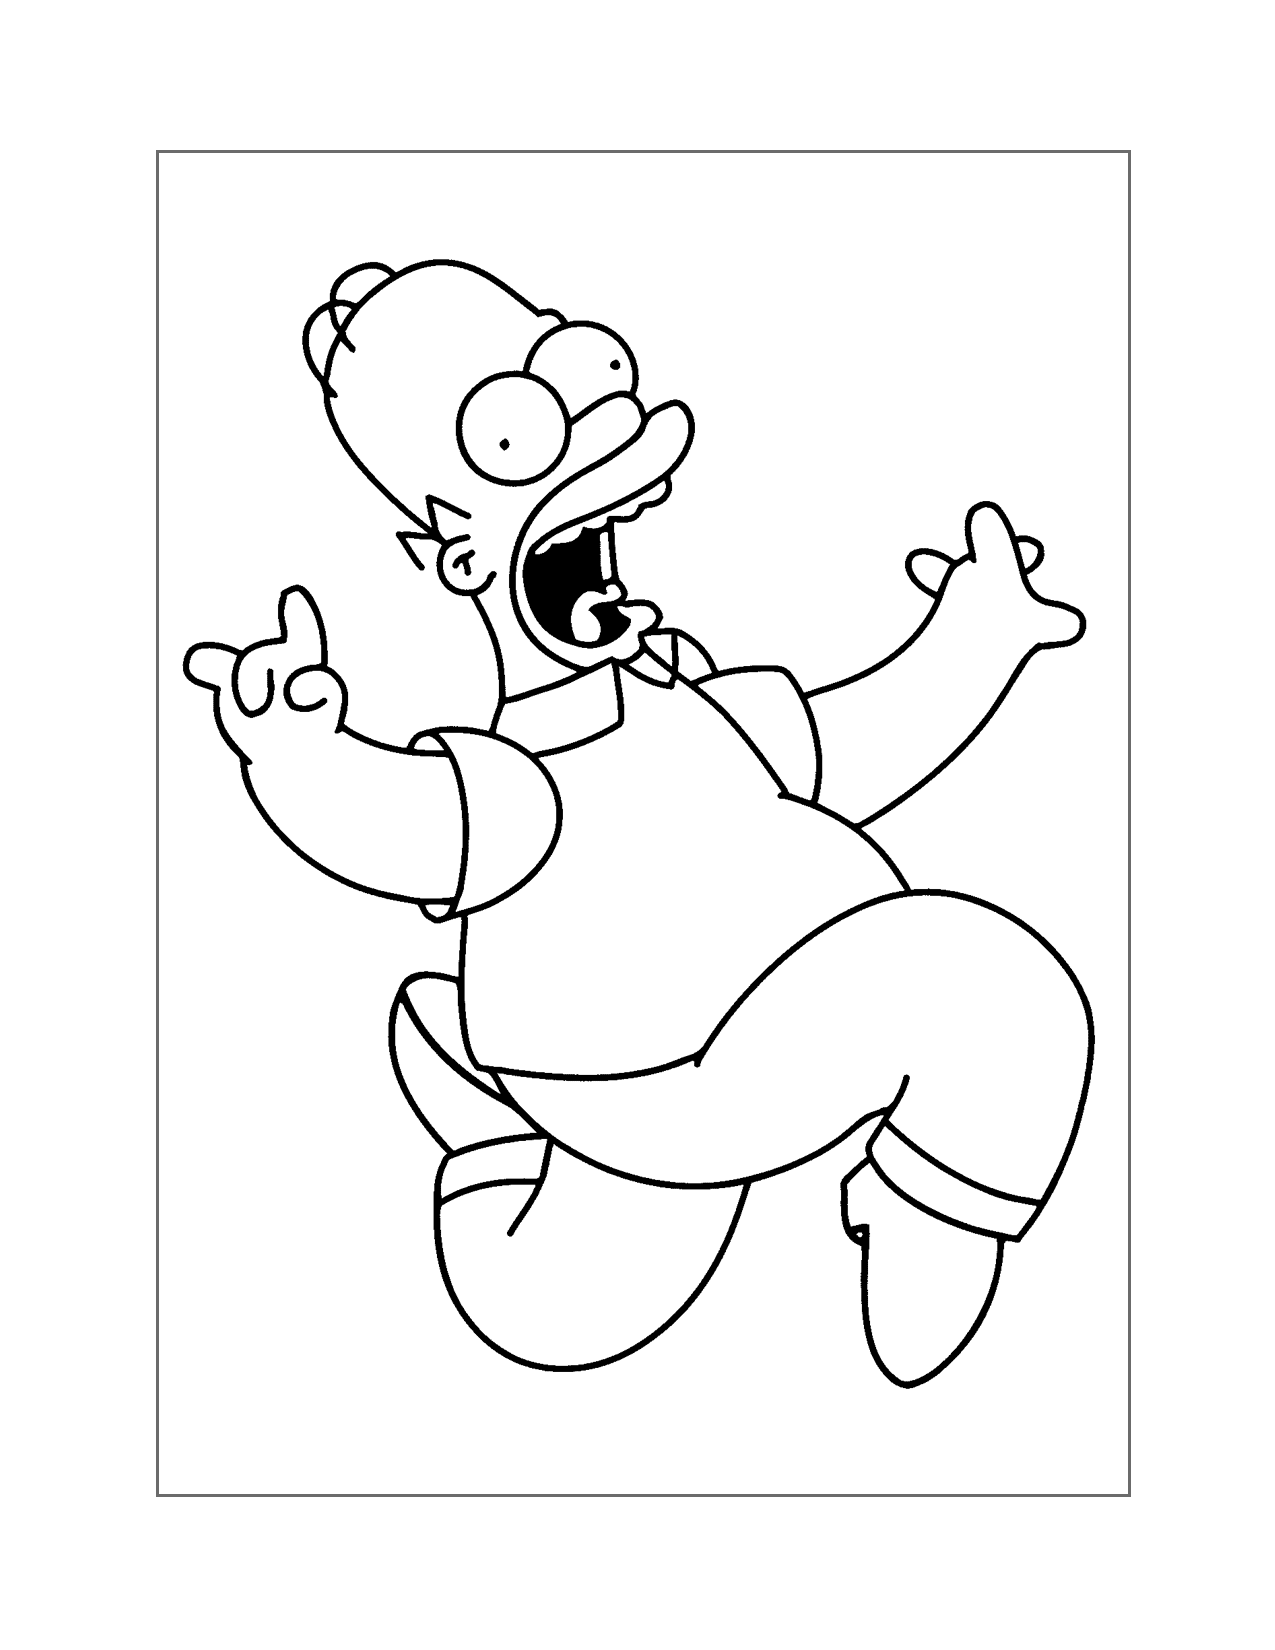 Homer Simpson Skipping Coloring Page